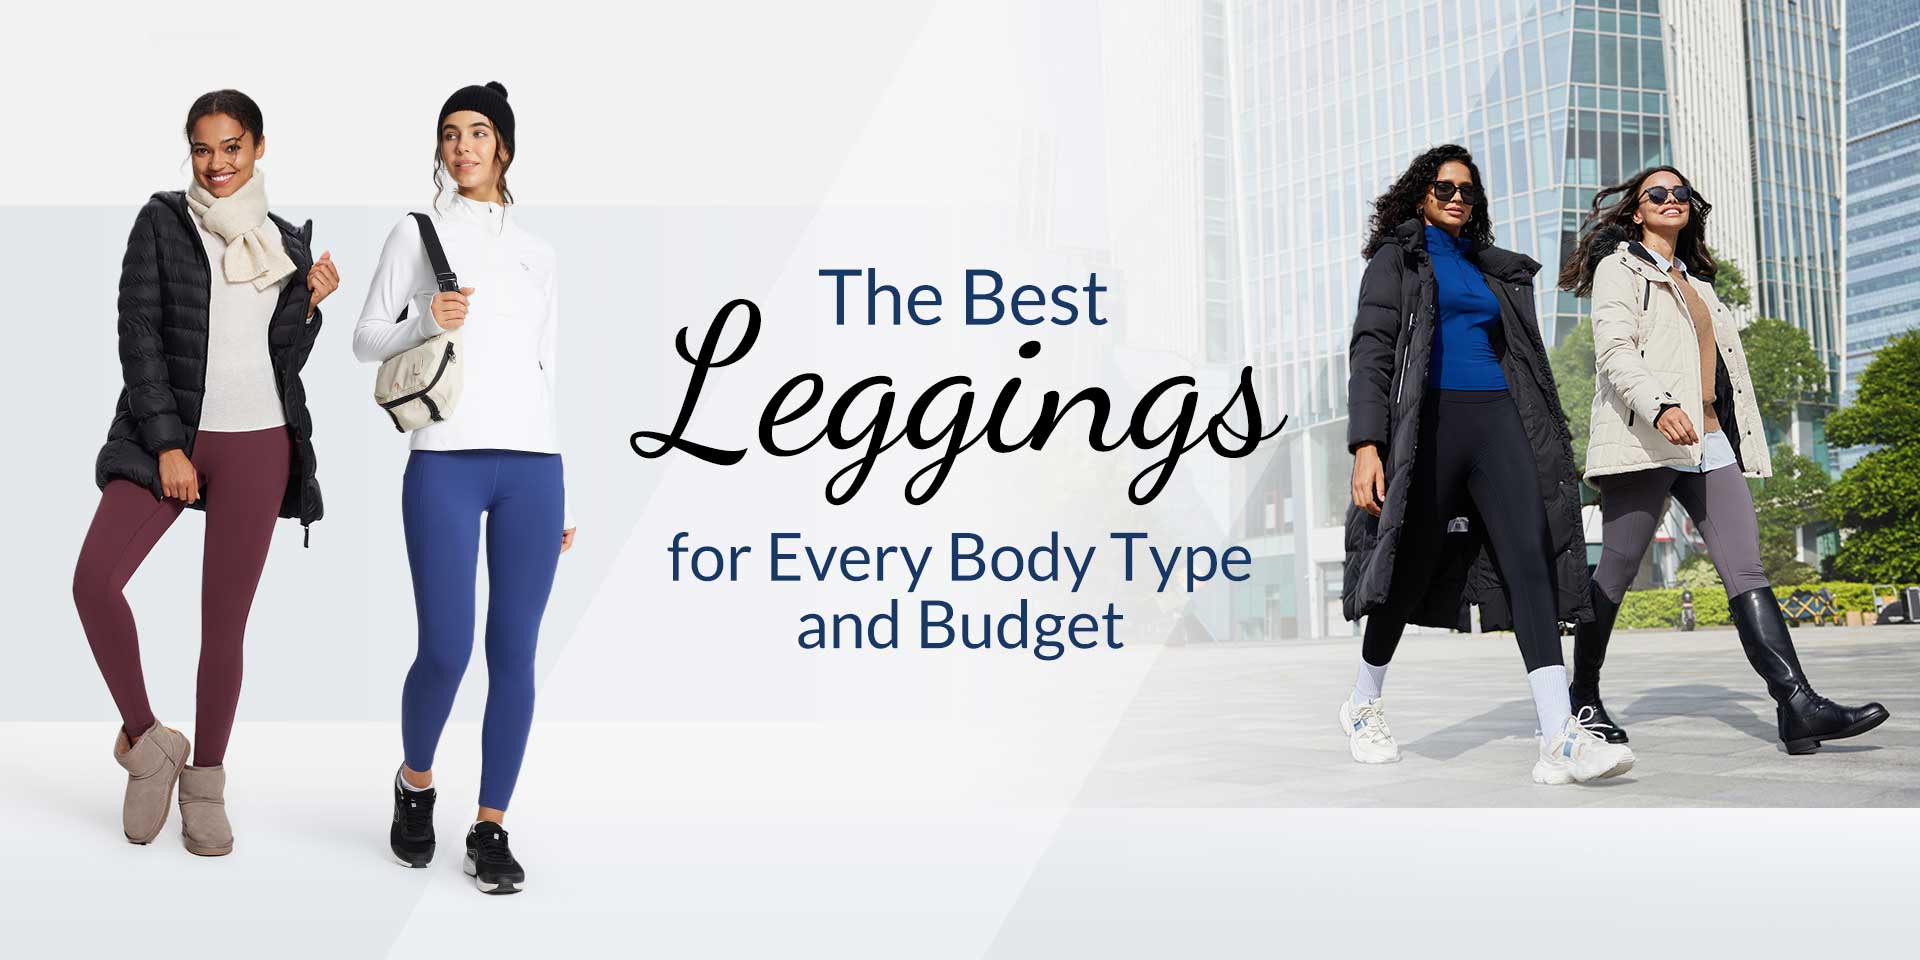 The Best Leggings for Every Body Type and Budget